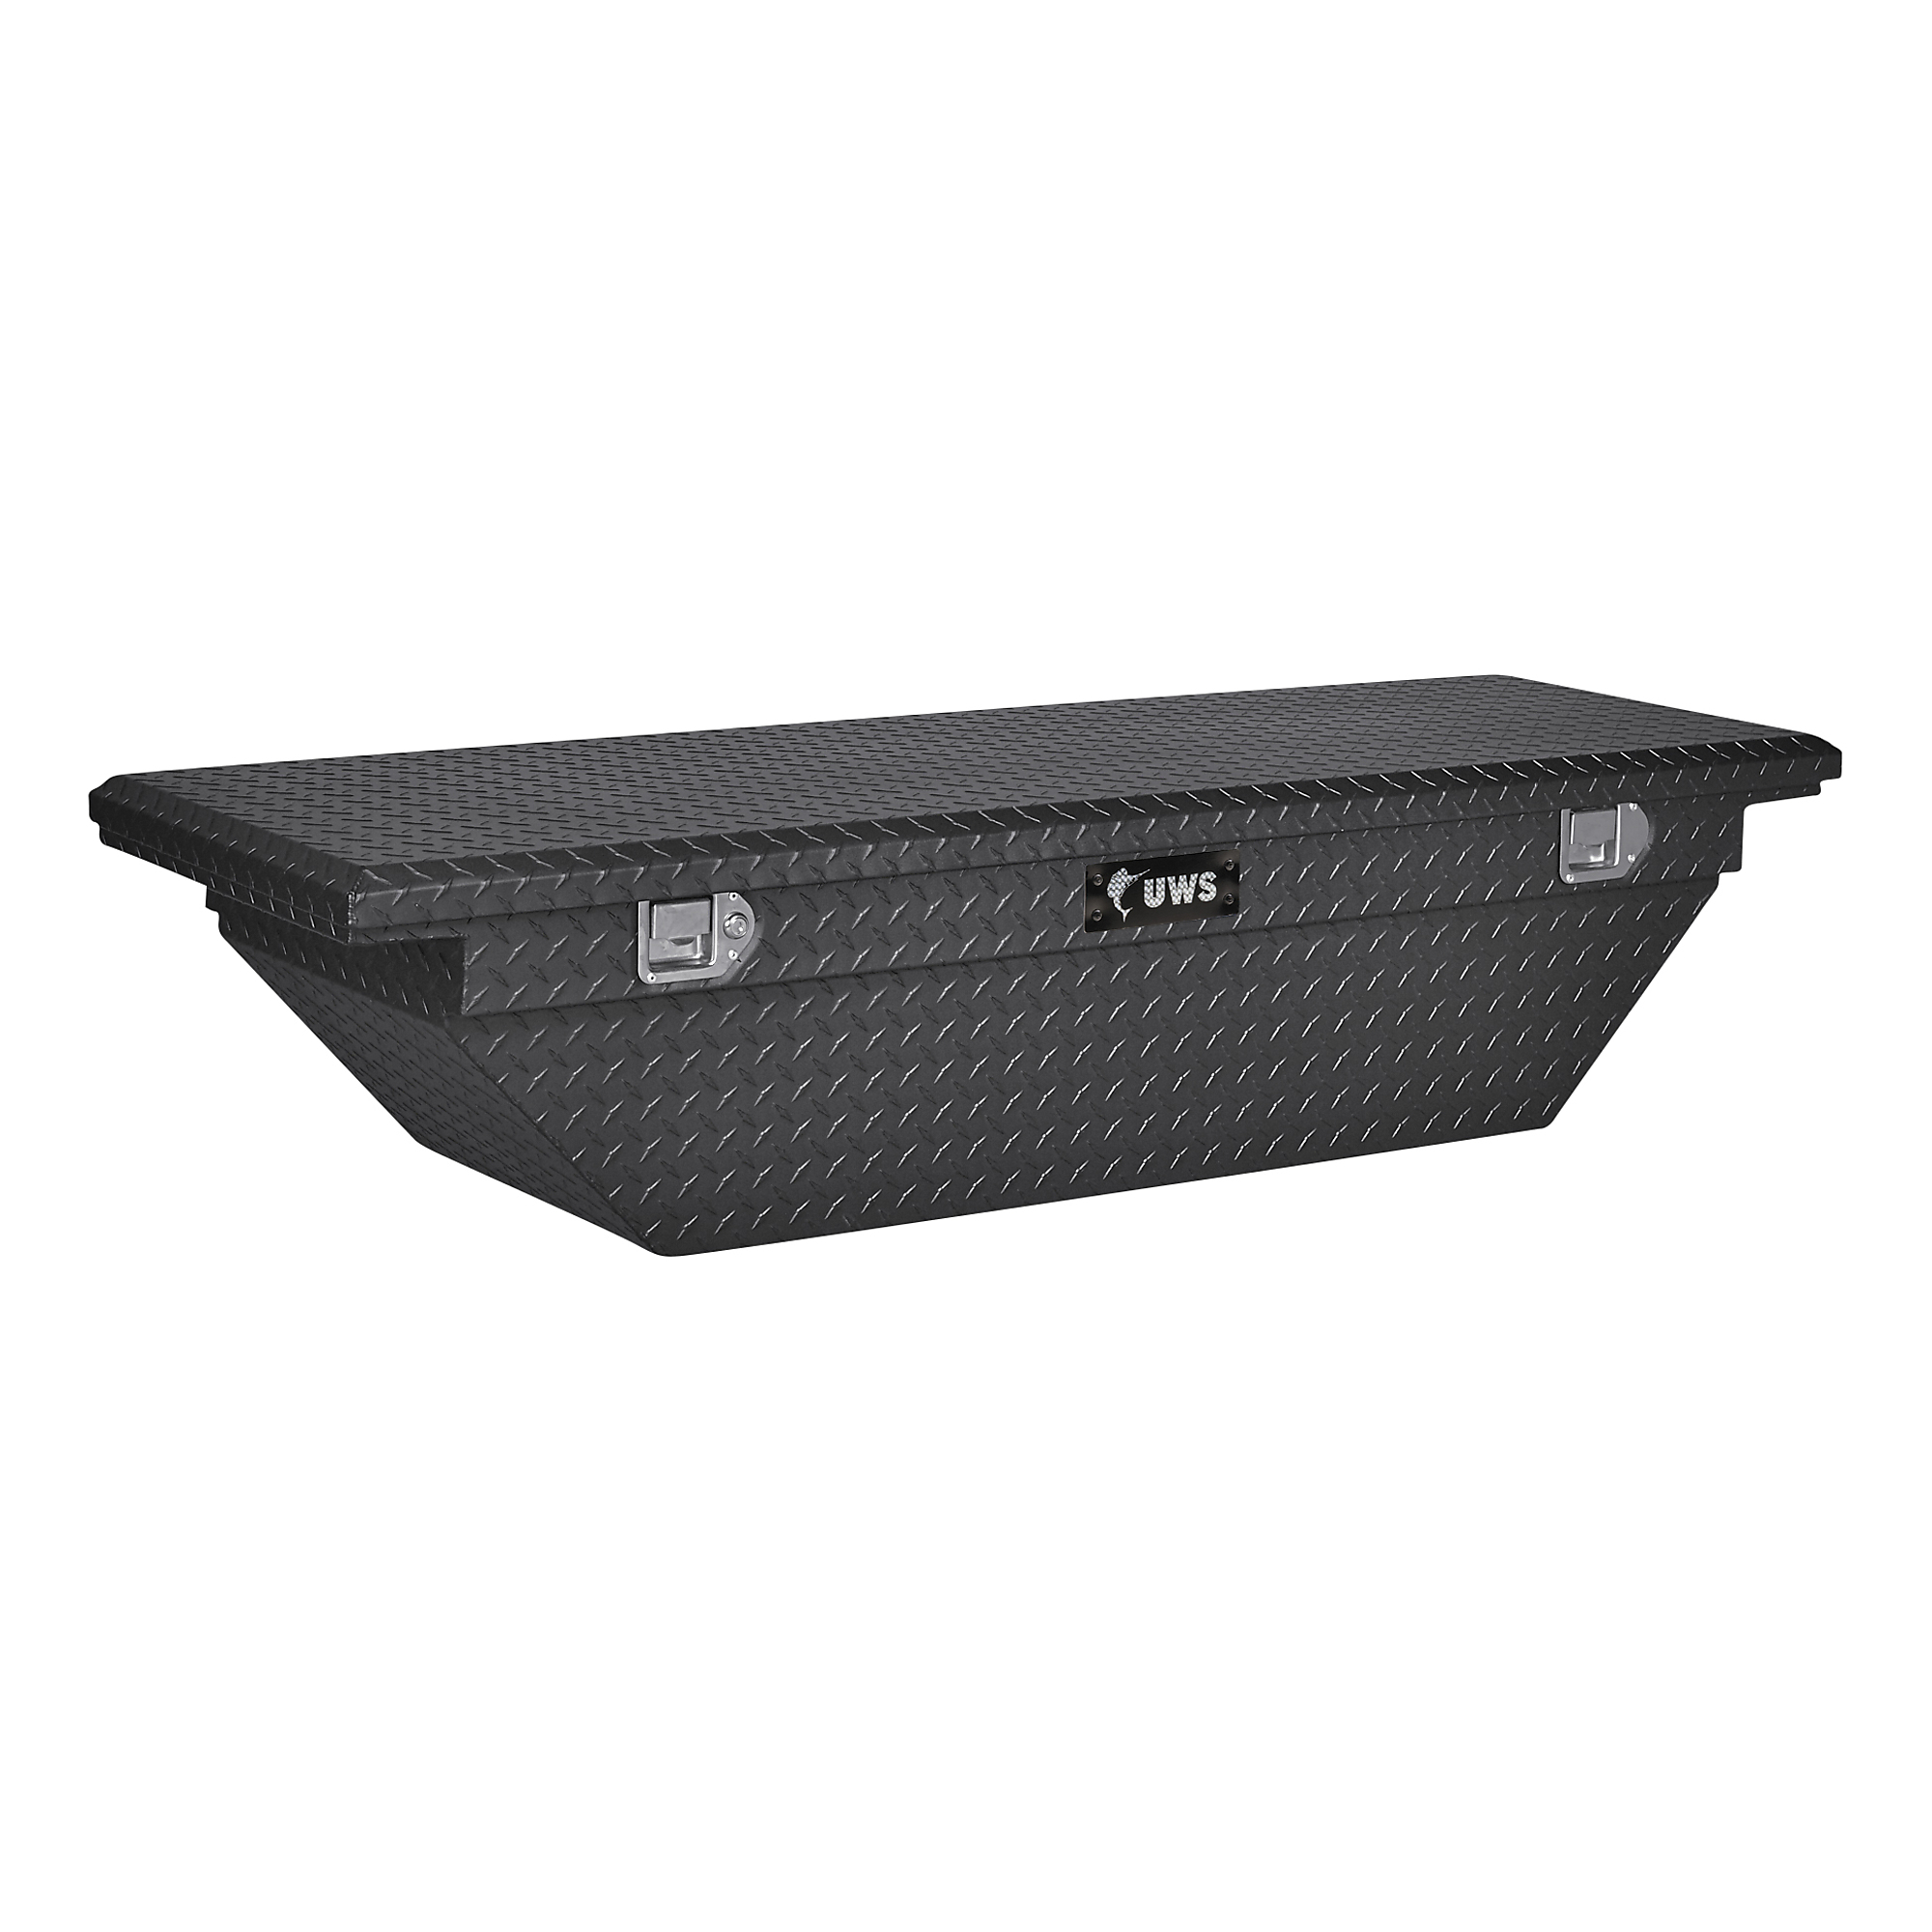 UWS, 63in. Angled Crossover Truck Tool Box, Width 63.875 in, Material  Aluminum, Color Finish Matte Black, Model# EC10313